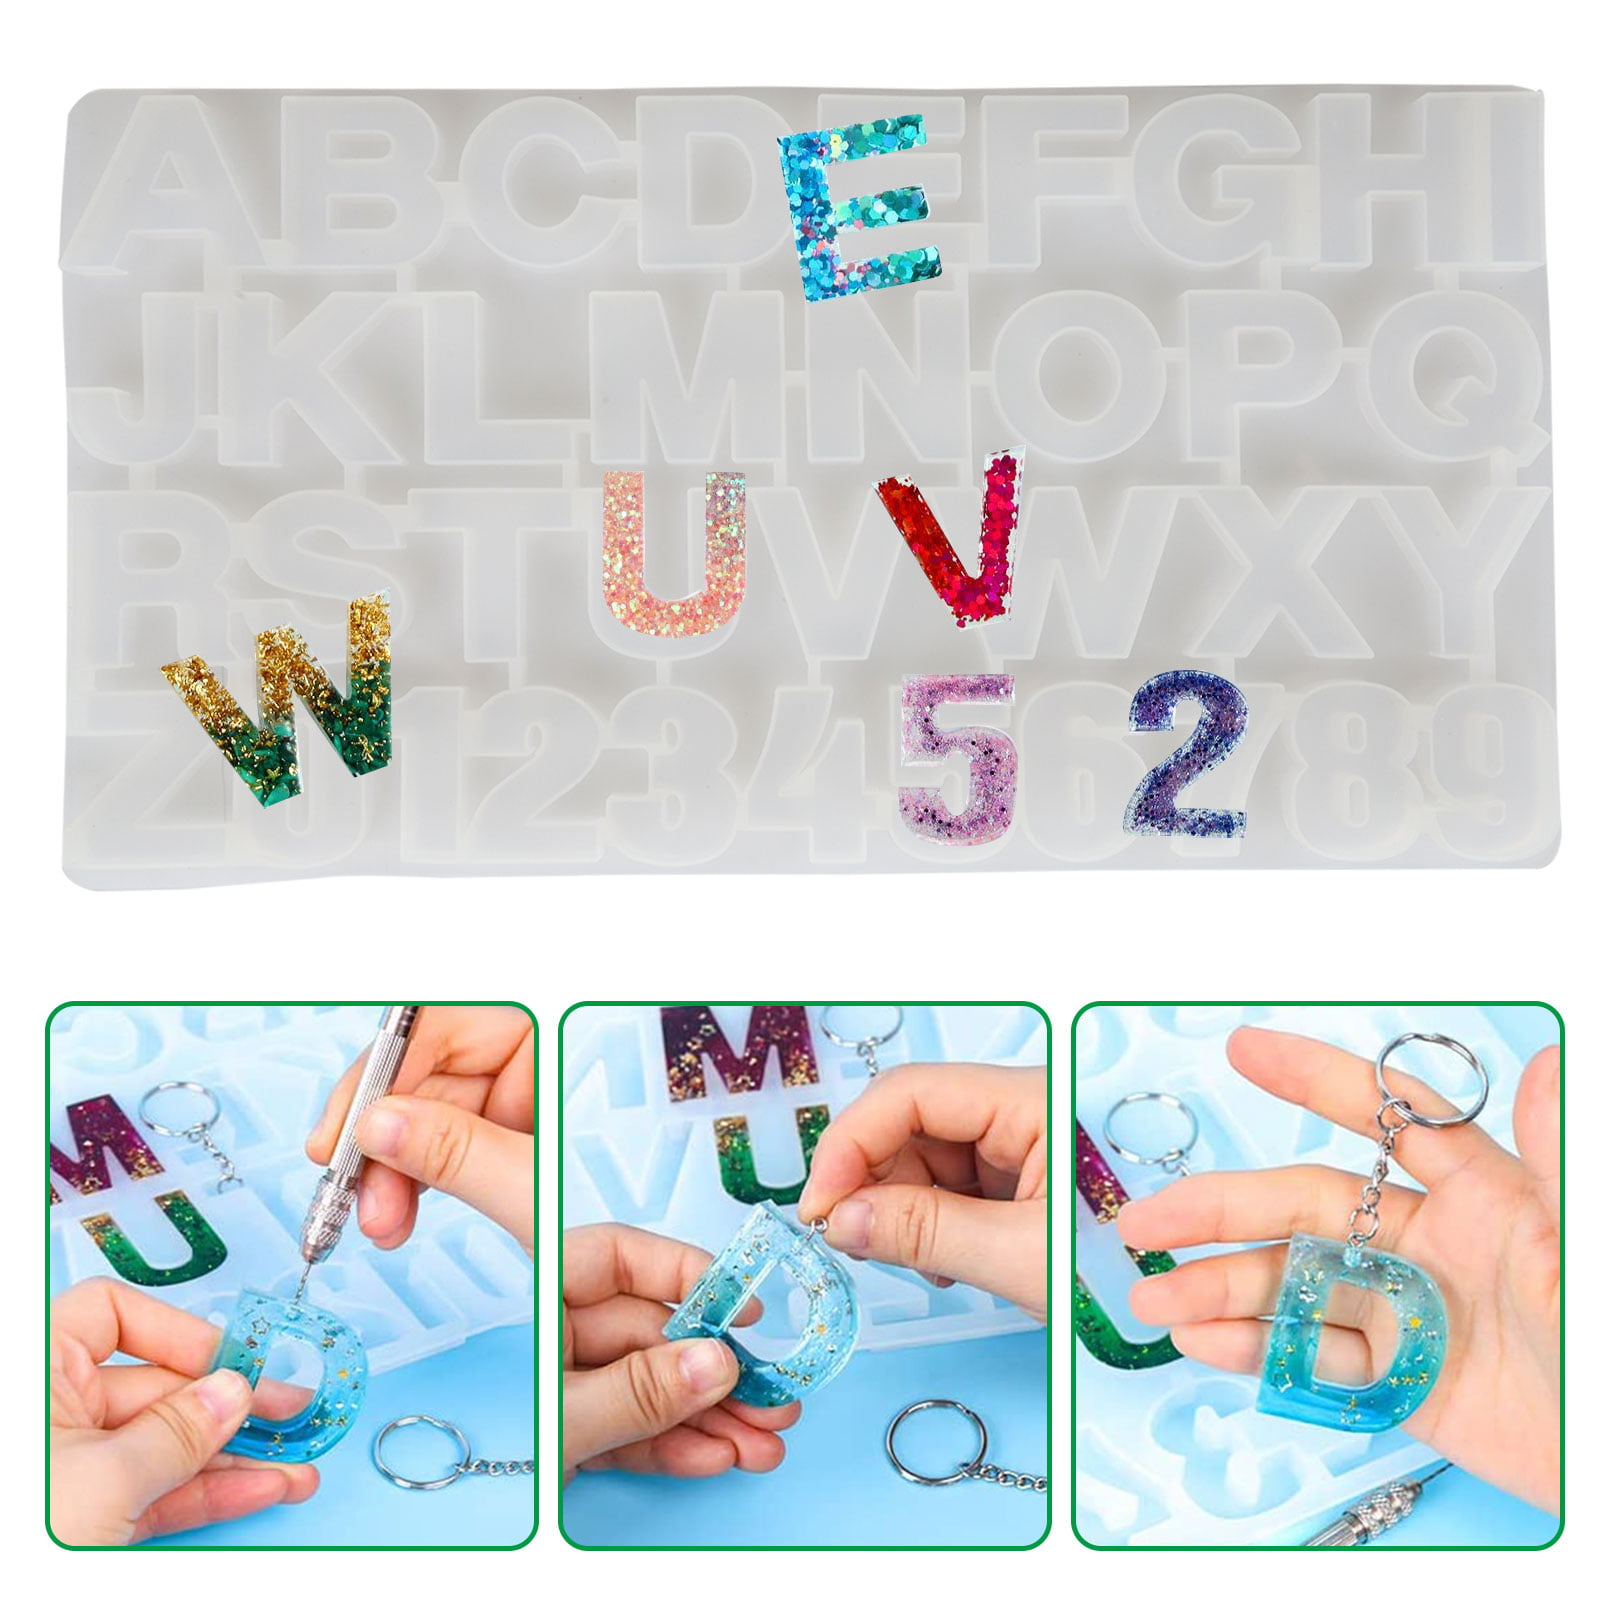 IGaiety Letter Molds Backward Alphabet Mold Starter Kit 206 Pcs Silicone Number Molds Epoxy Resin Mold with Accessories for Resi